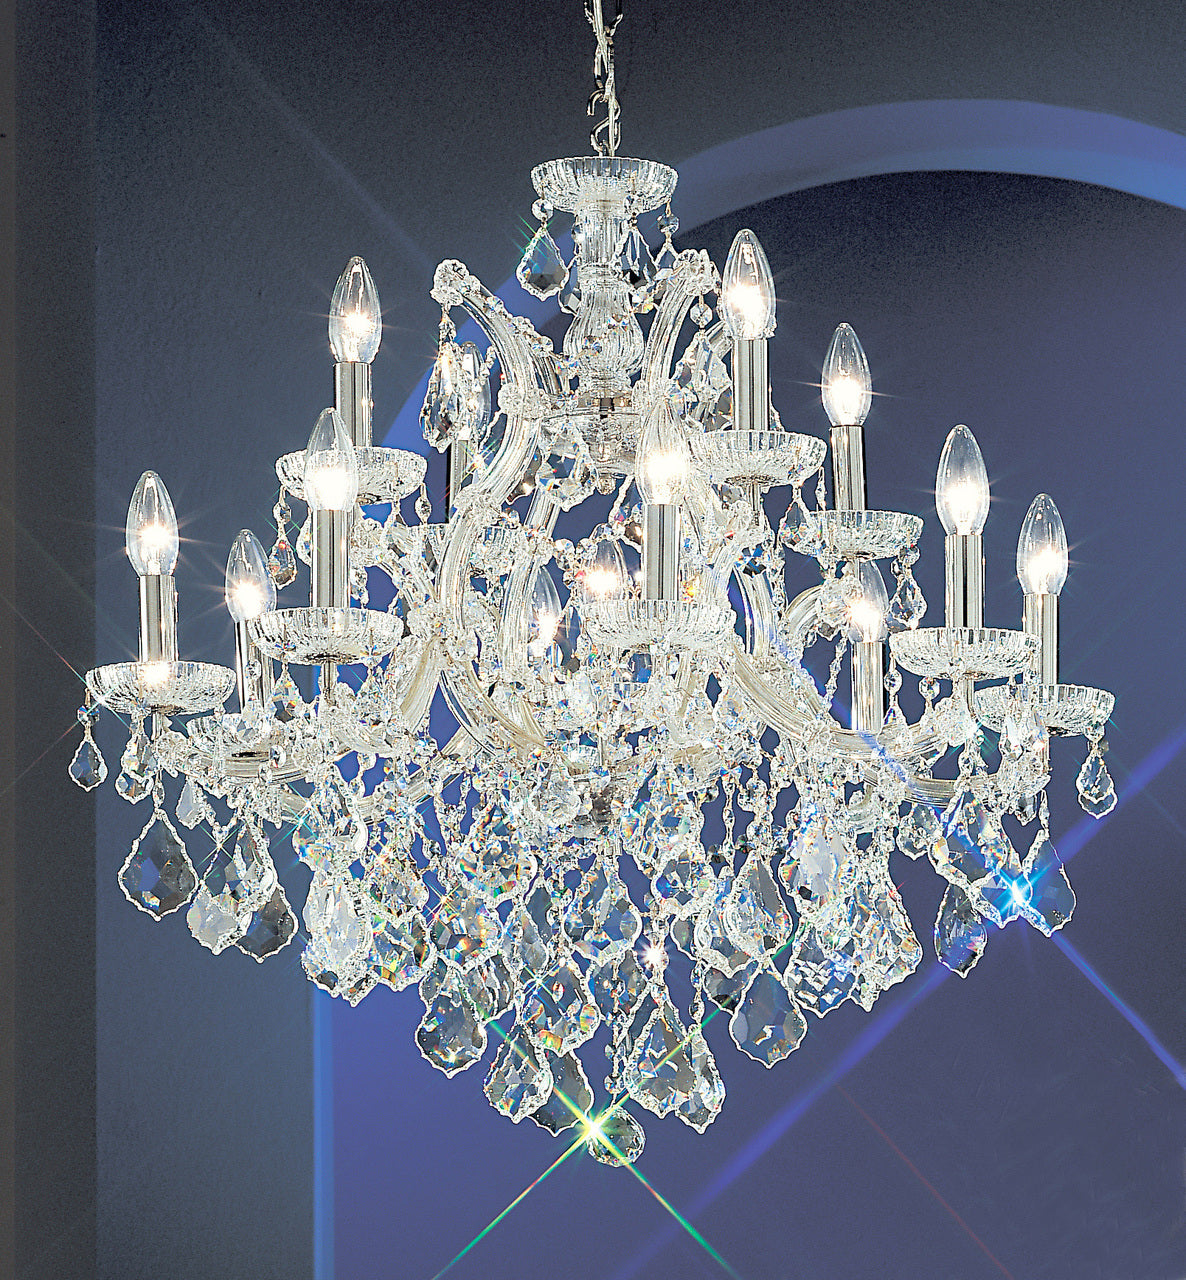 Classic Lighting 8133 CH SC Maria Theresa Traditional Crystal Chandelier in Chrome (Imported from Italy)